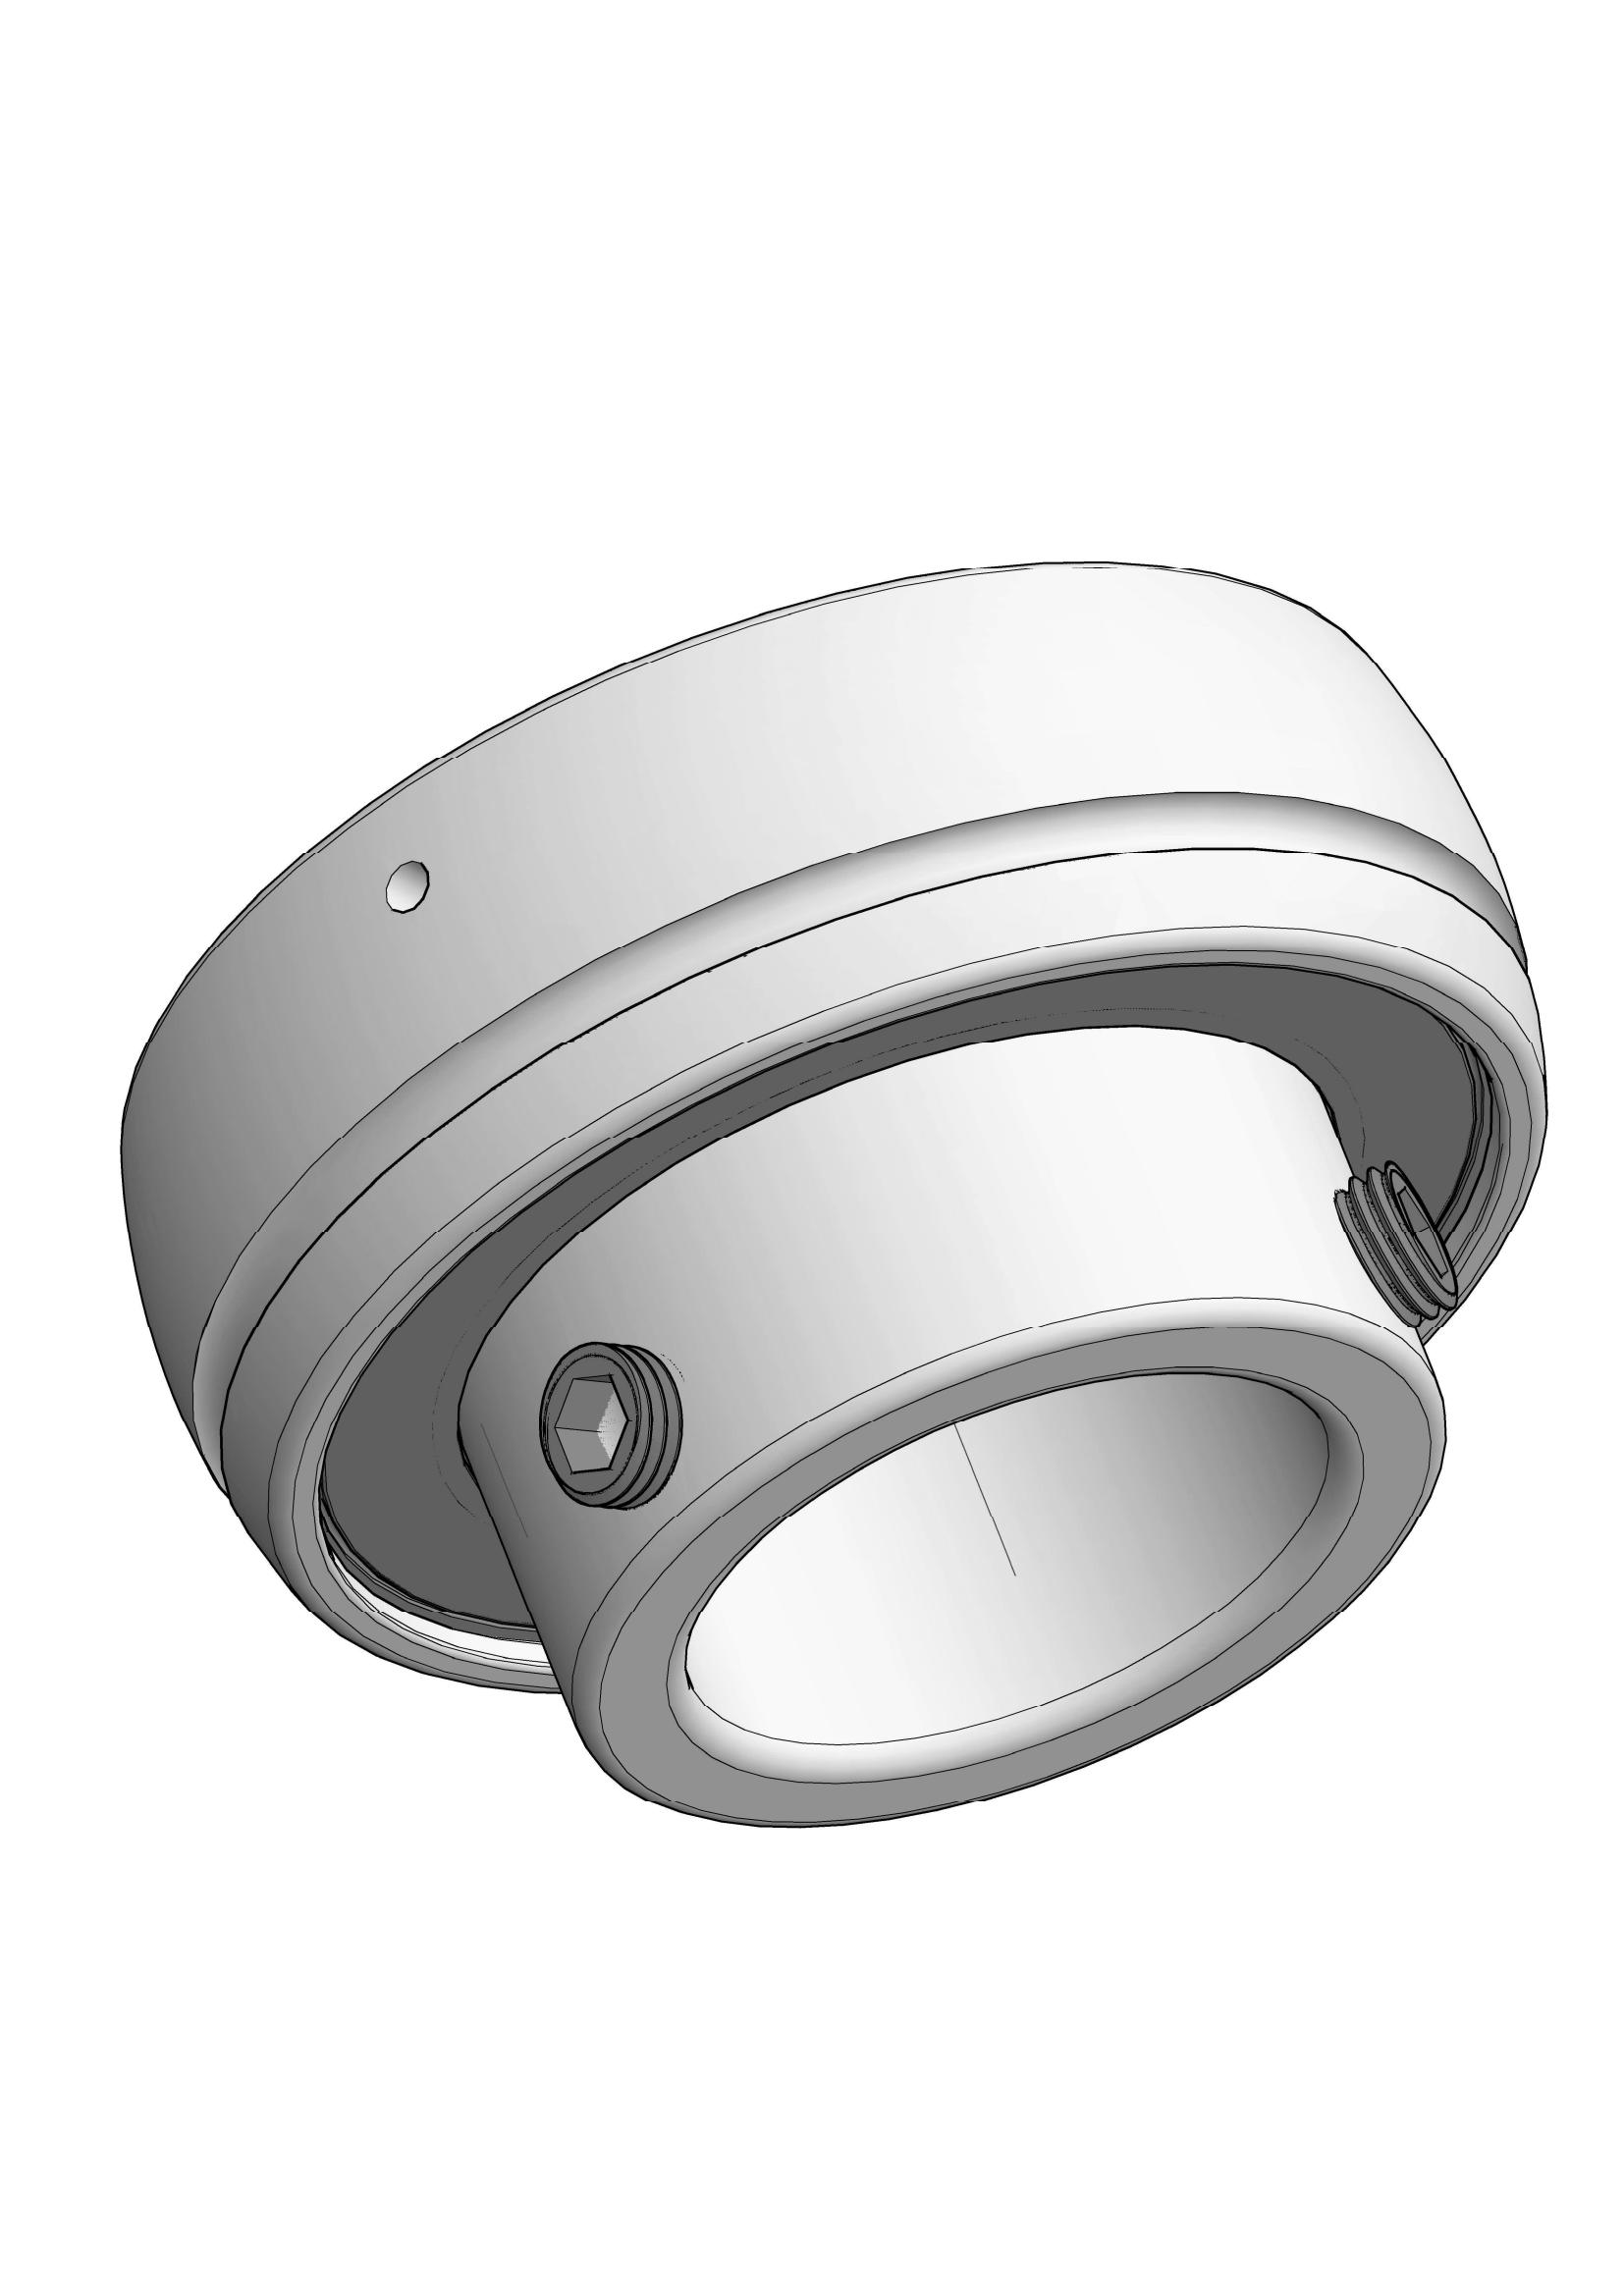 SB206-20 insert ball bearings with Eccentric Collar Lock with 1-1/4 inch Bore